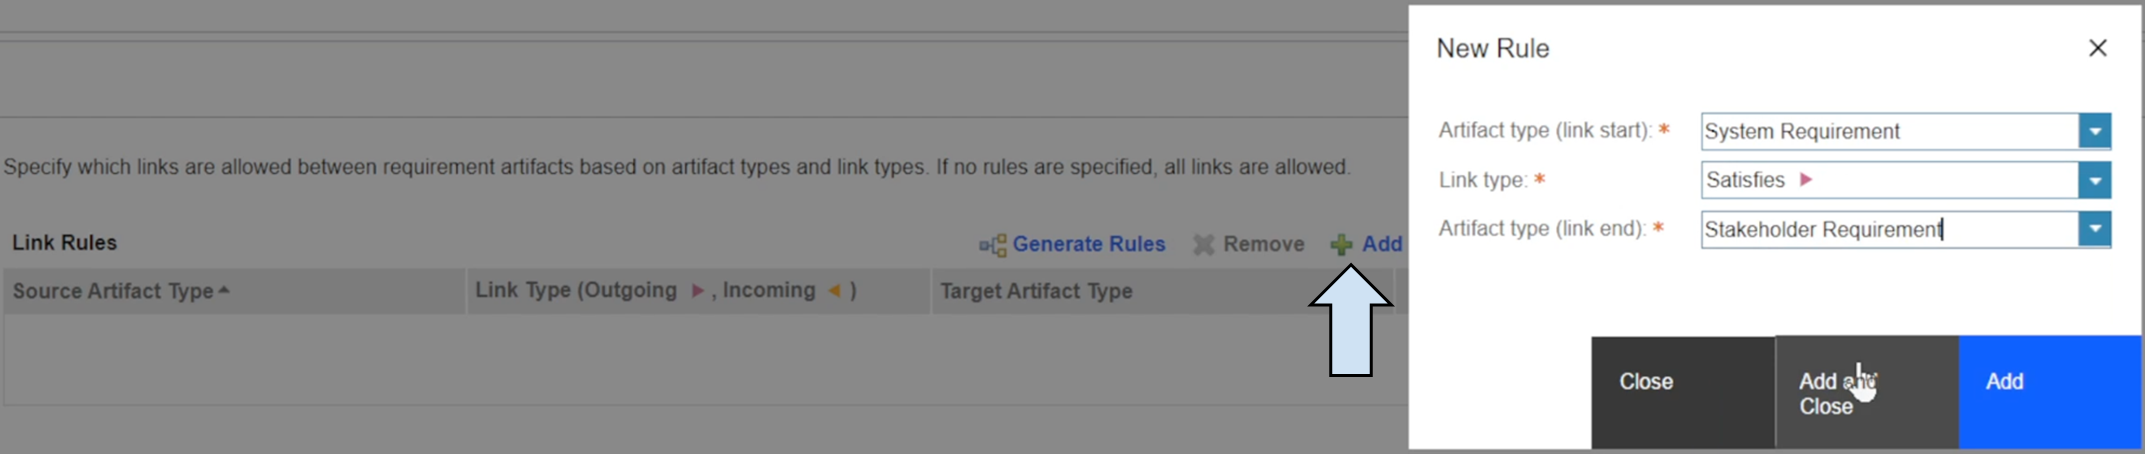 Add is on the right side of the window, next to Remove. You can set Artifact type for link start/end and also link type